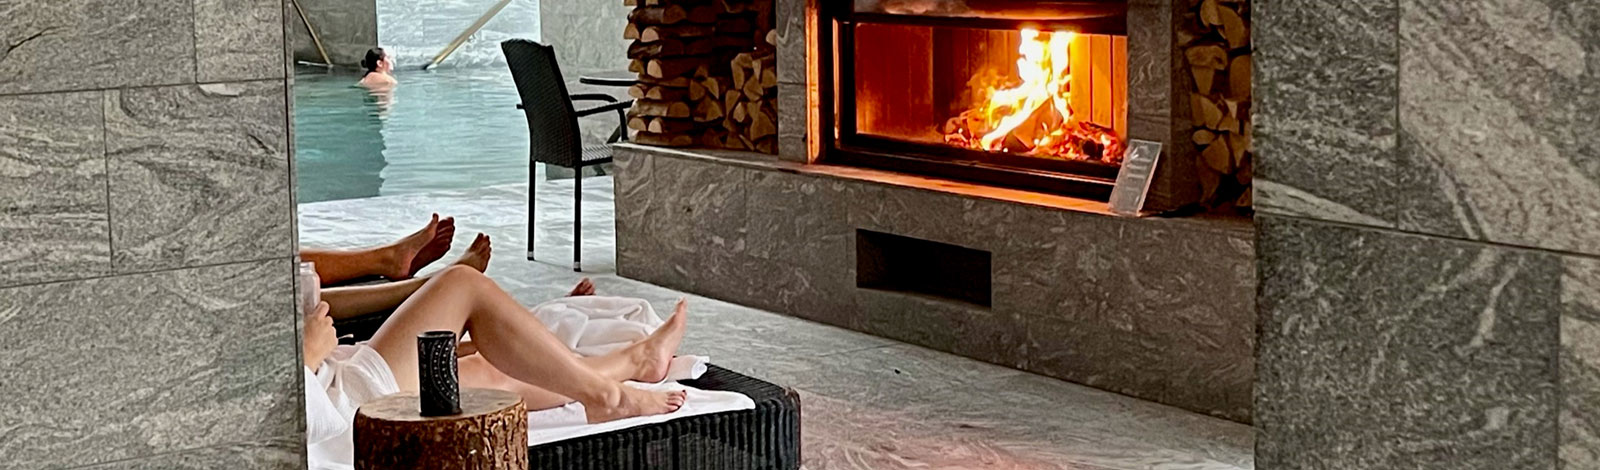 Relaxation in front of the fireplace in the thermal baths